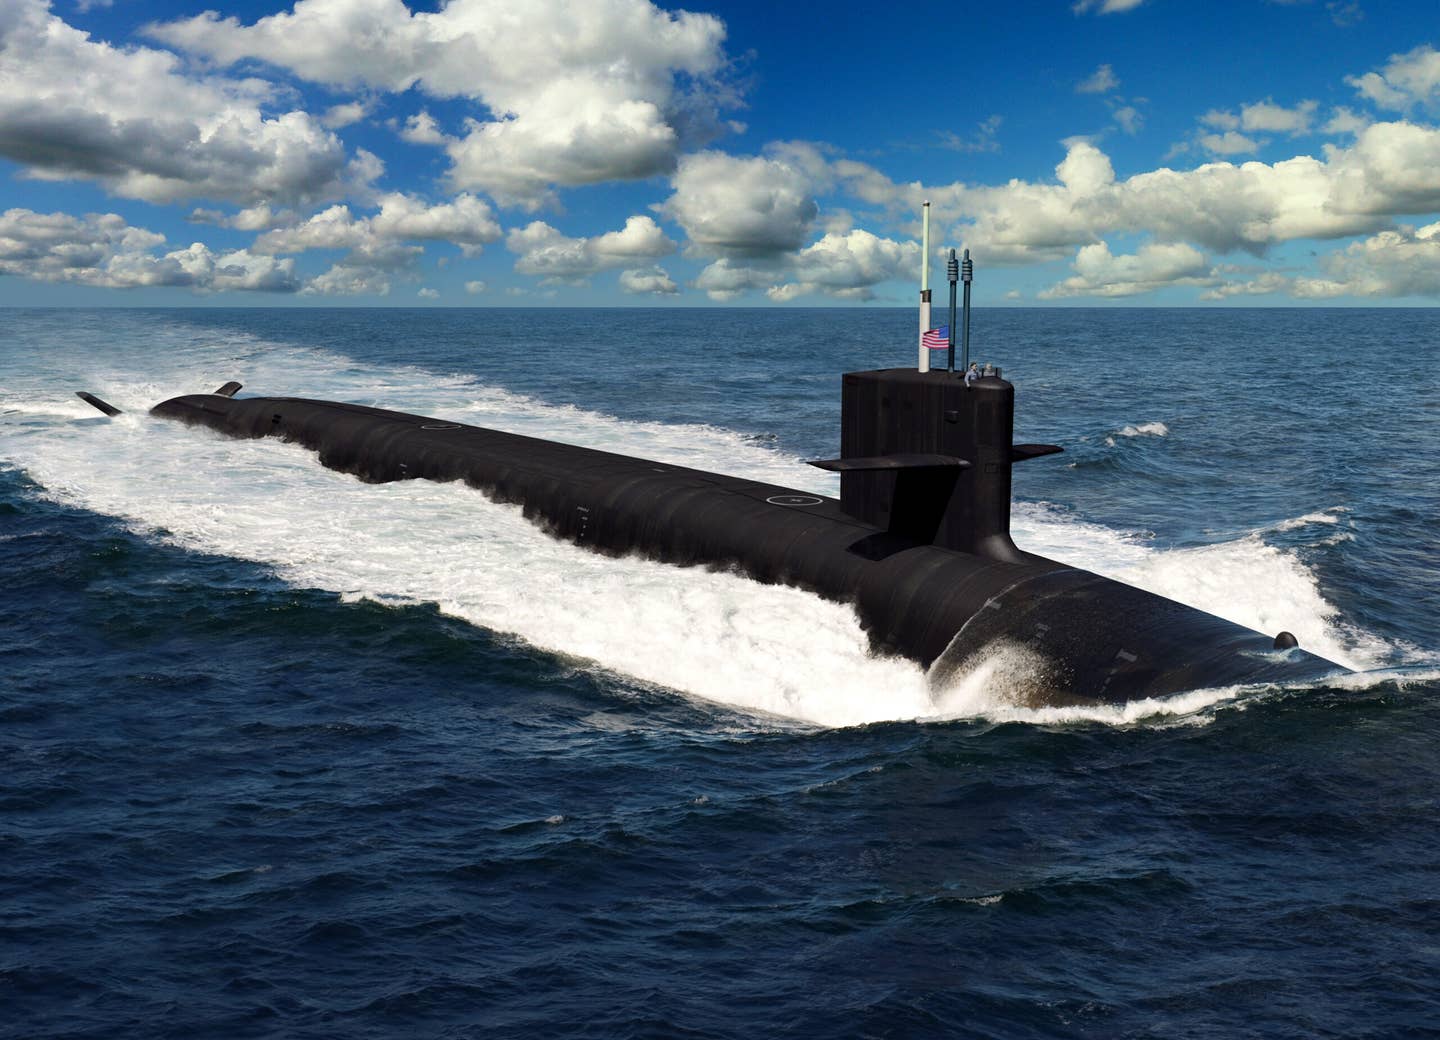 Successful procurement of the <i>Columbia-class</i> SSBN is an absolute top priority for America's nuclear deterrent as the <em>Ohio</em>-class SSBNs are approaching the end of their service lives. (U.S. Navy illustration/Released)